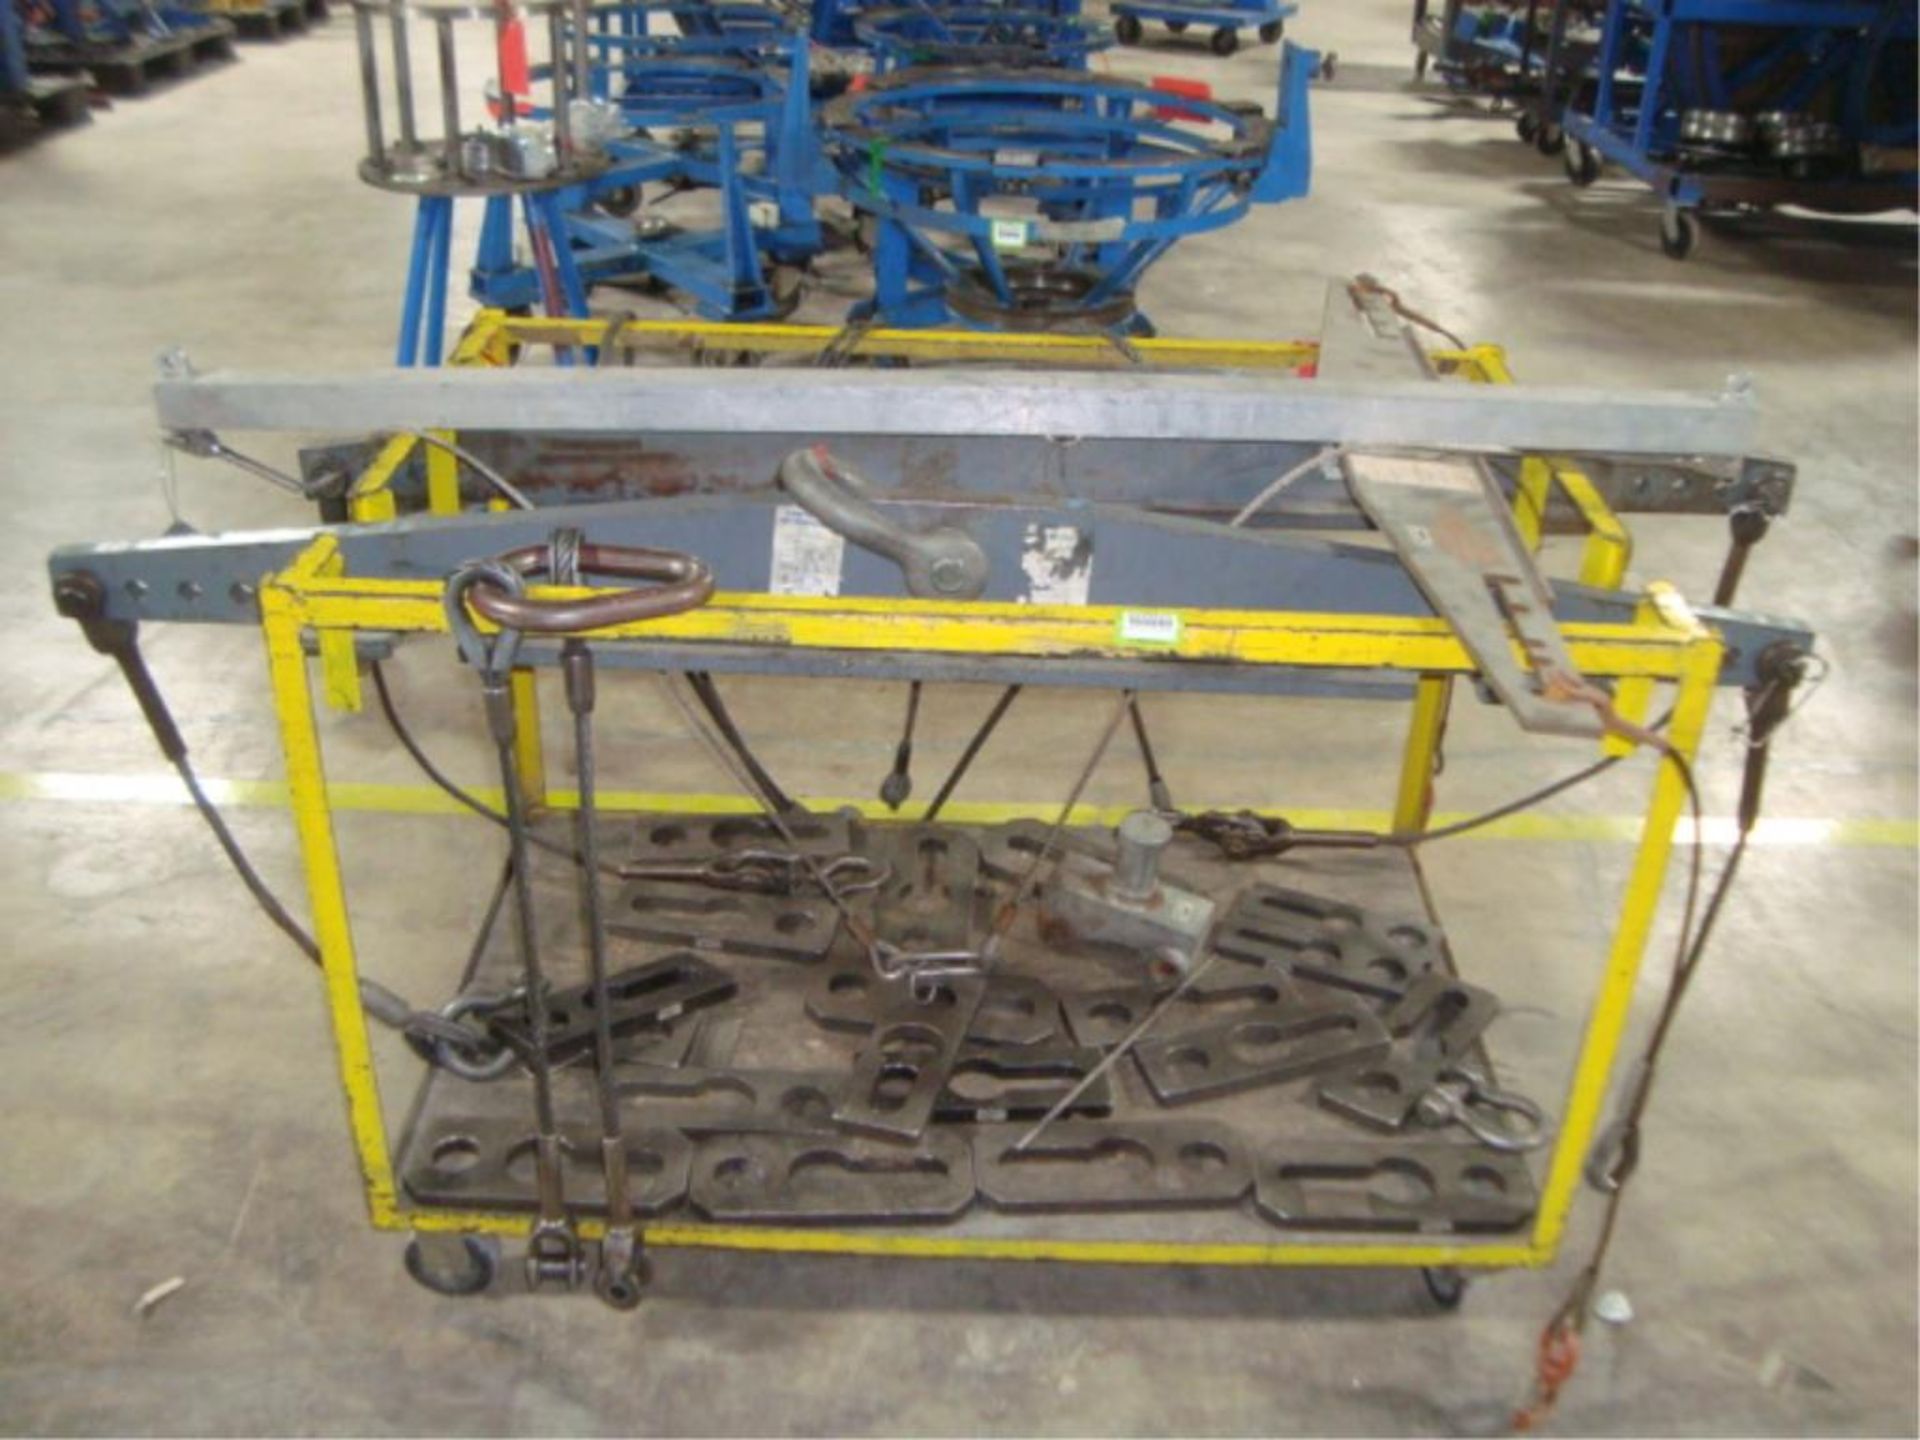 Tool Lift Bars & Mobile Cart With Fixtures